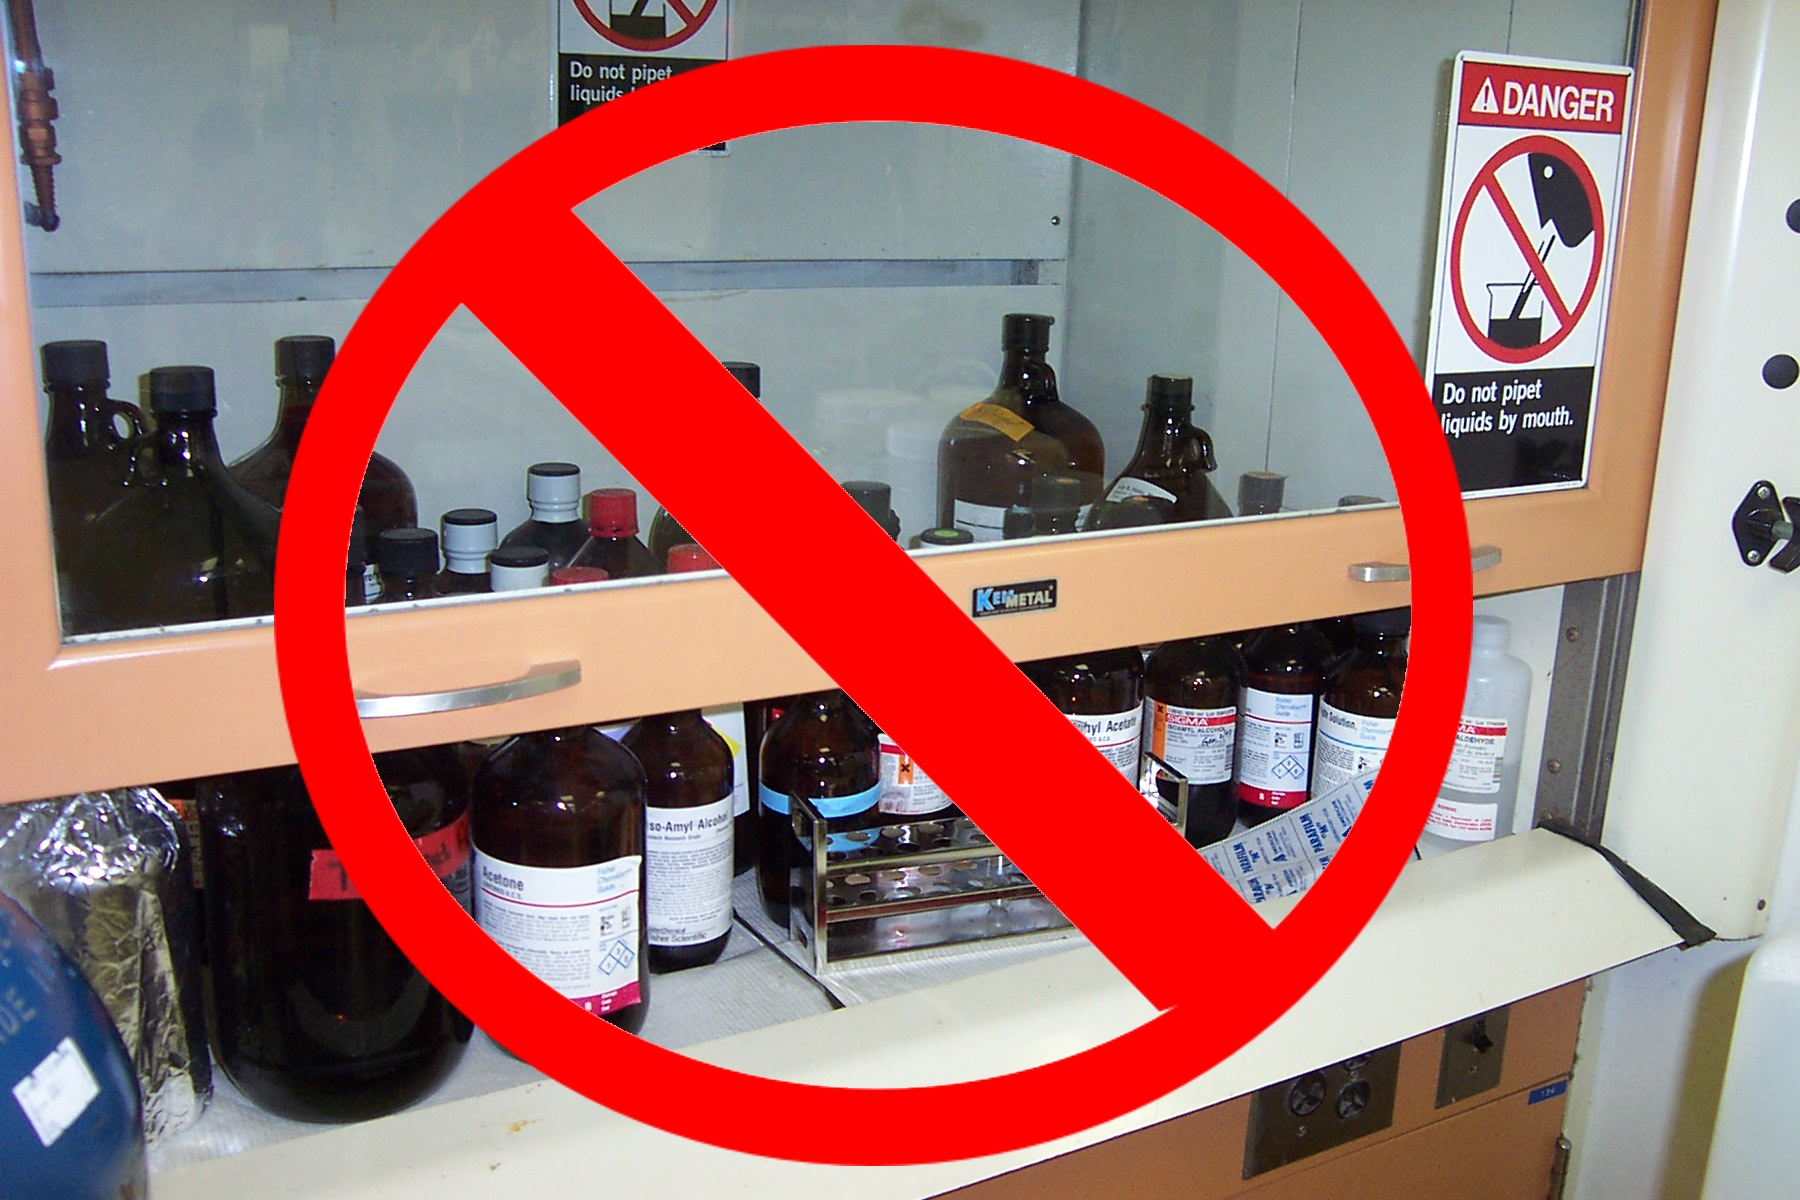 Many bottles of chemicals stored under fume hood with red circle and line through it.